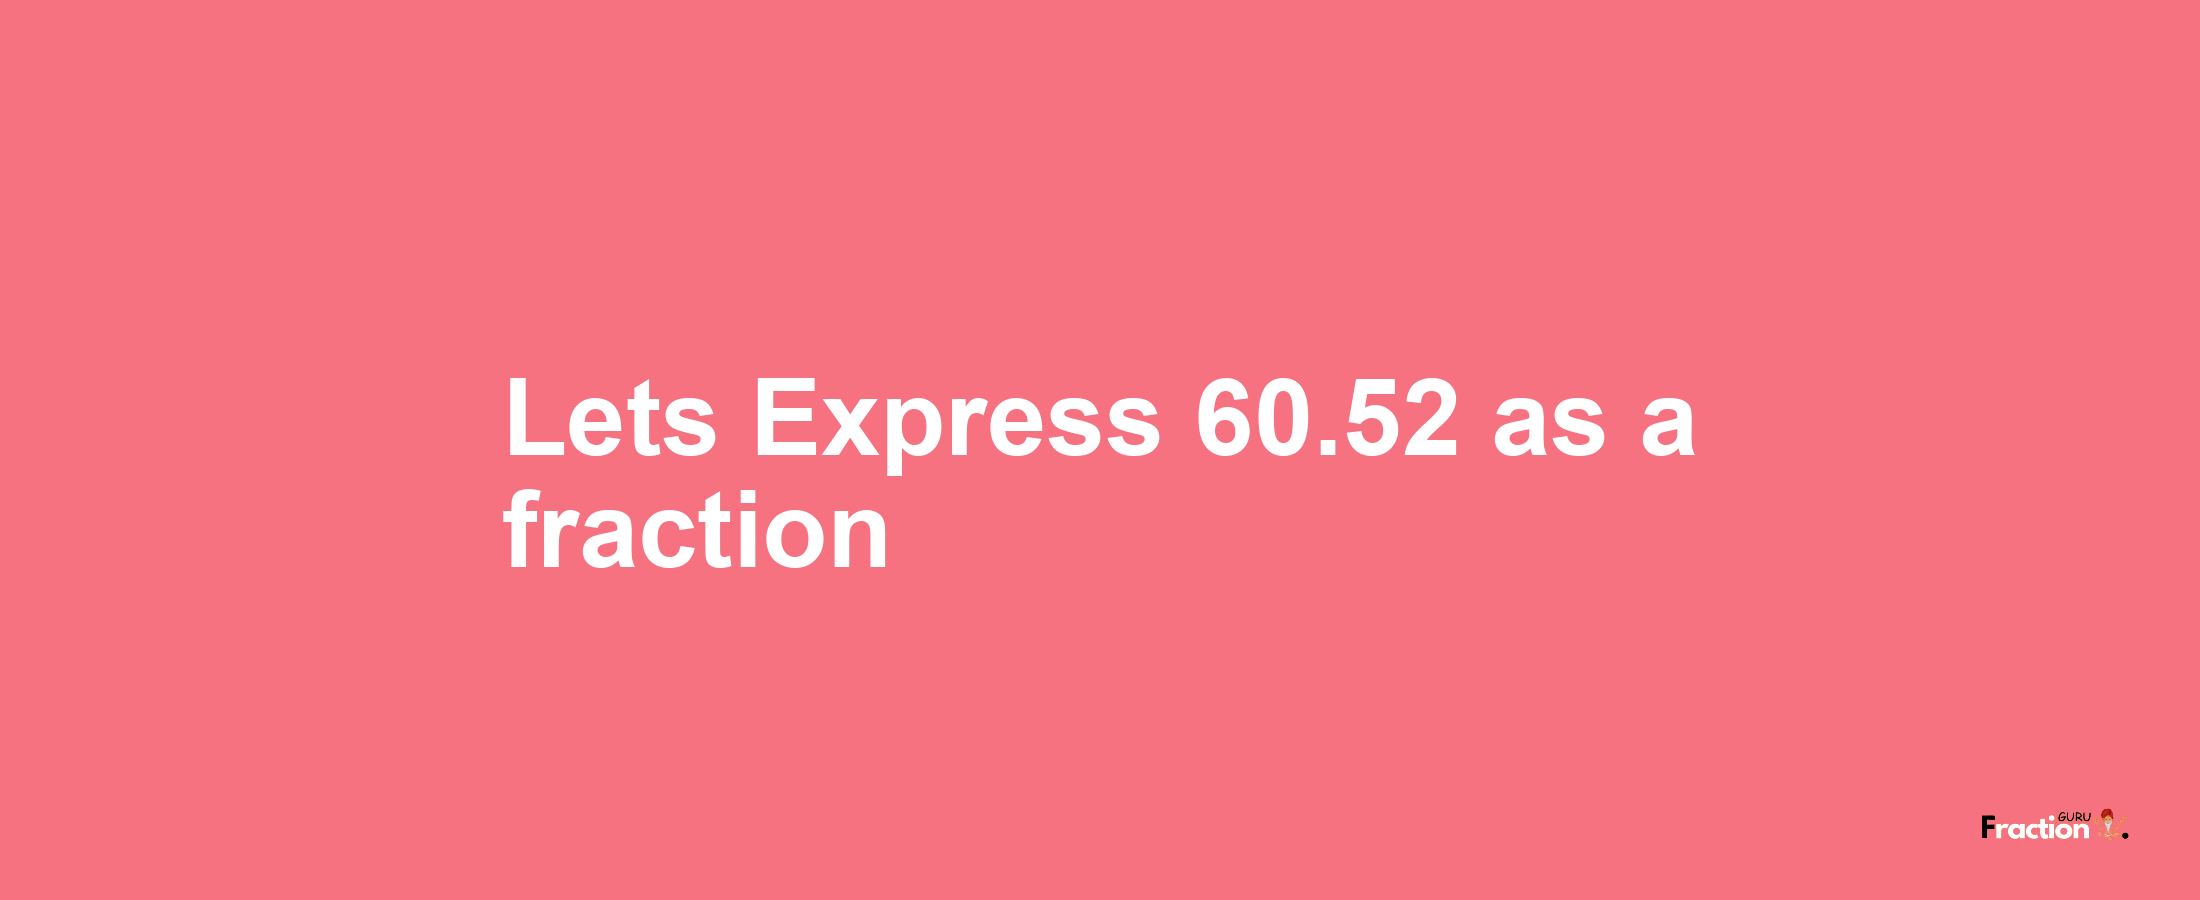 Lets Express 60.52 as afraction